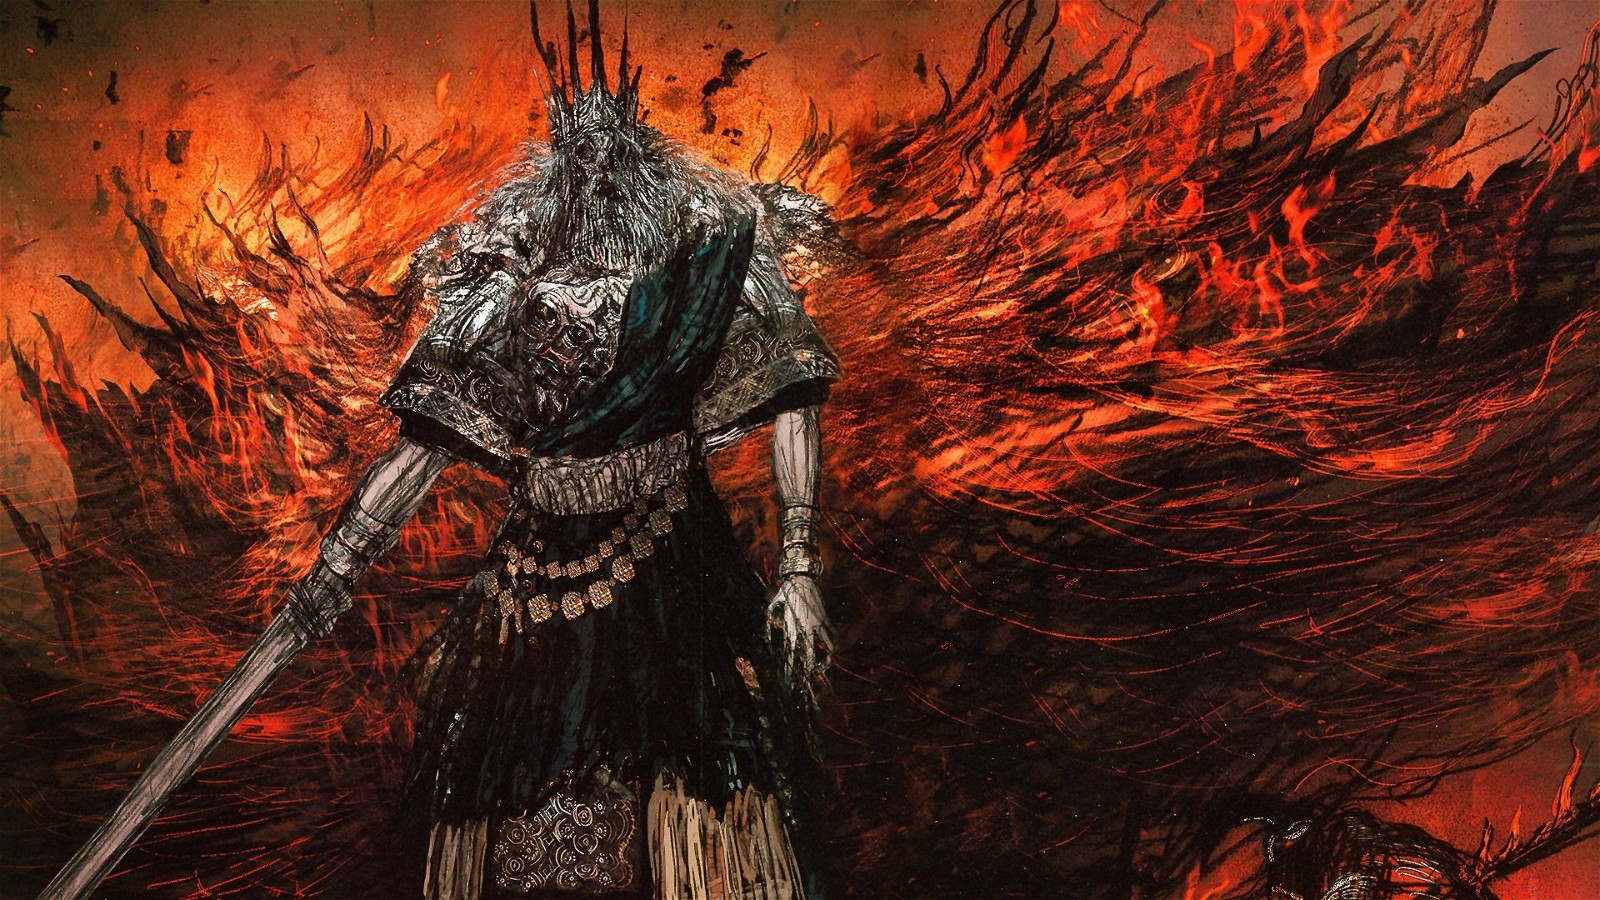 Official artwork depicting Gwyn, Lord of Sunlight. Image credit: FromSoftware